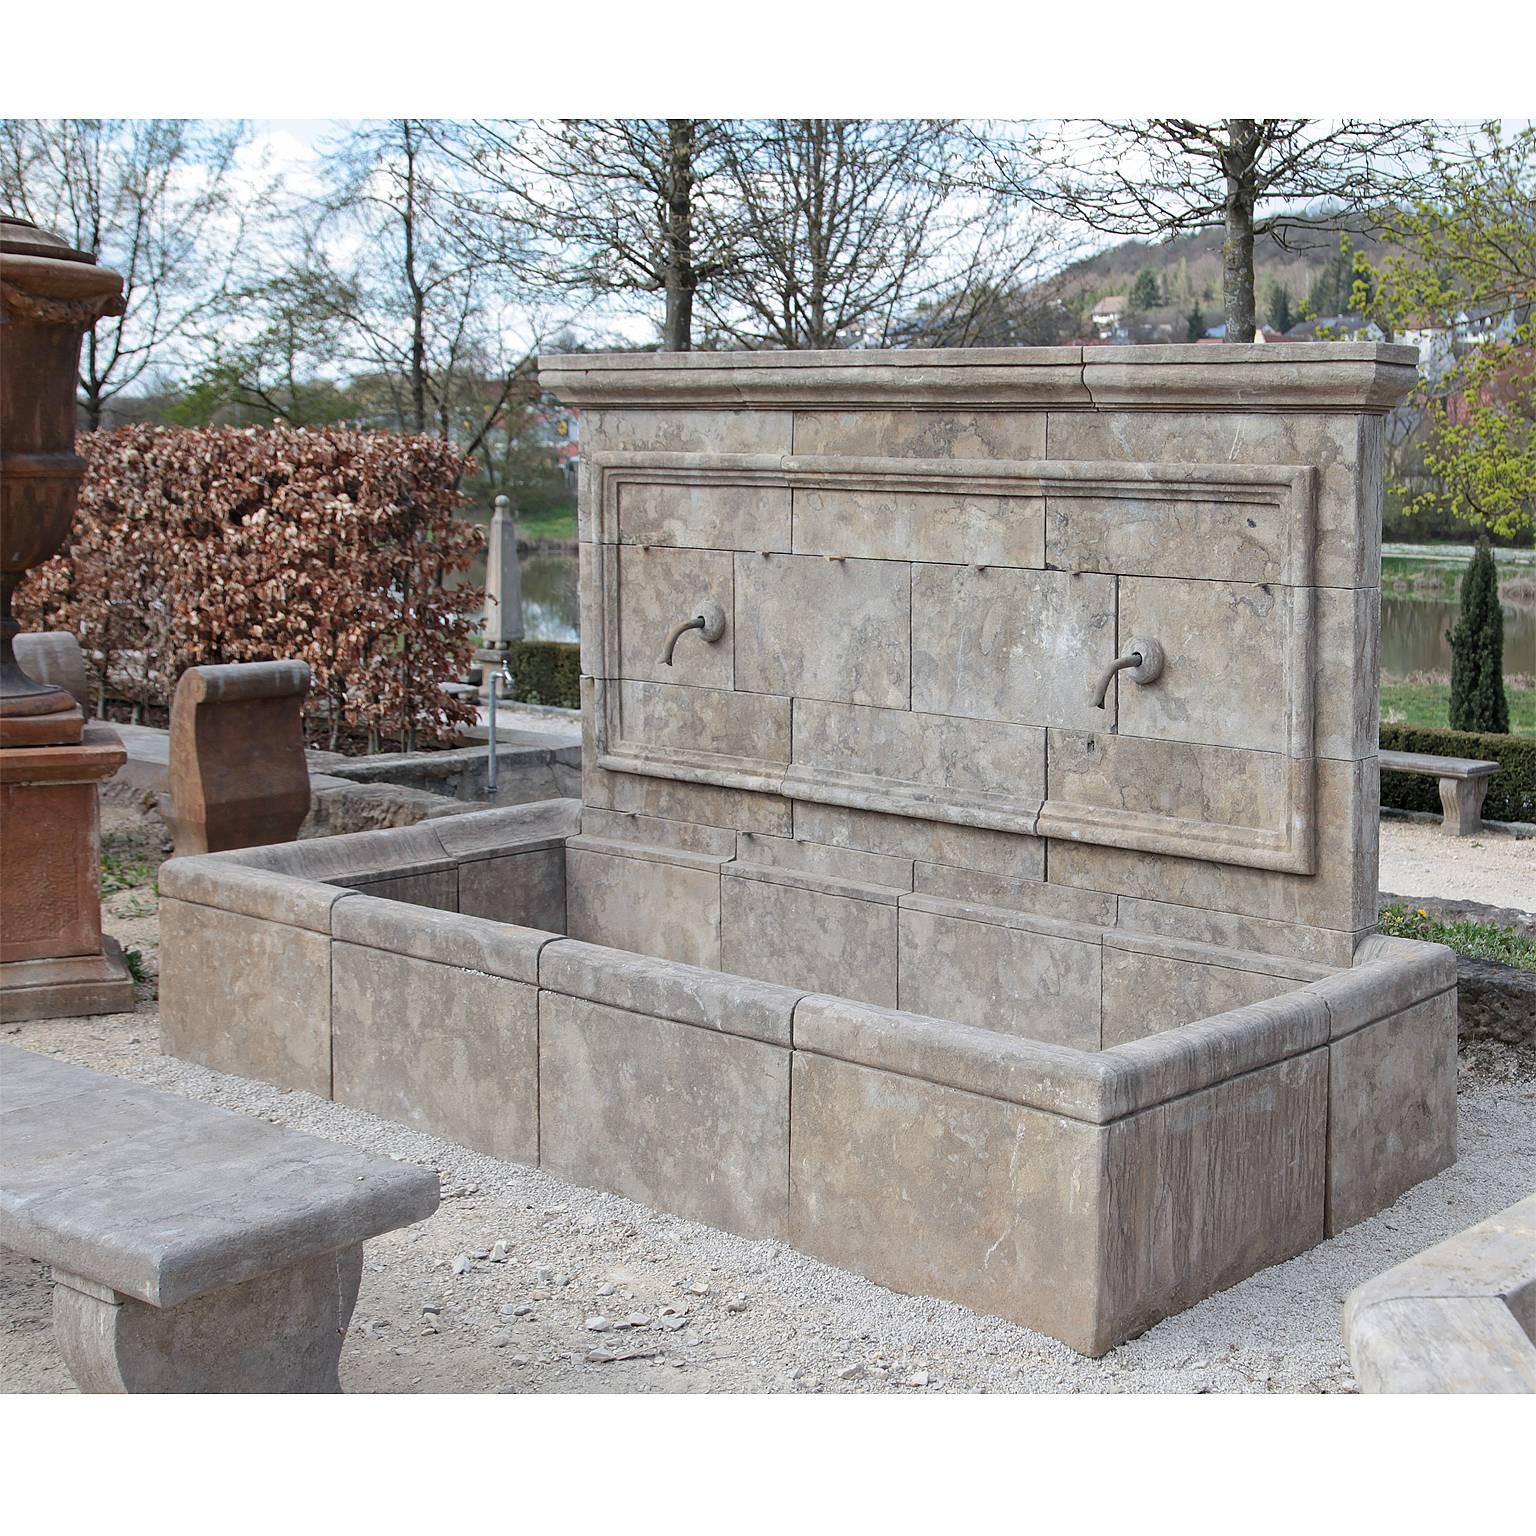 A large wall fountain made from blue stone with a rectangular basin. The back wall is architecturally divided and features two spigots. The height of the basin is 50cm.